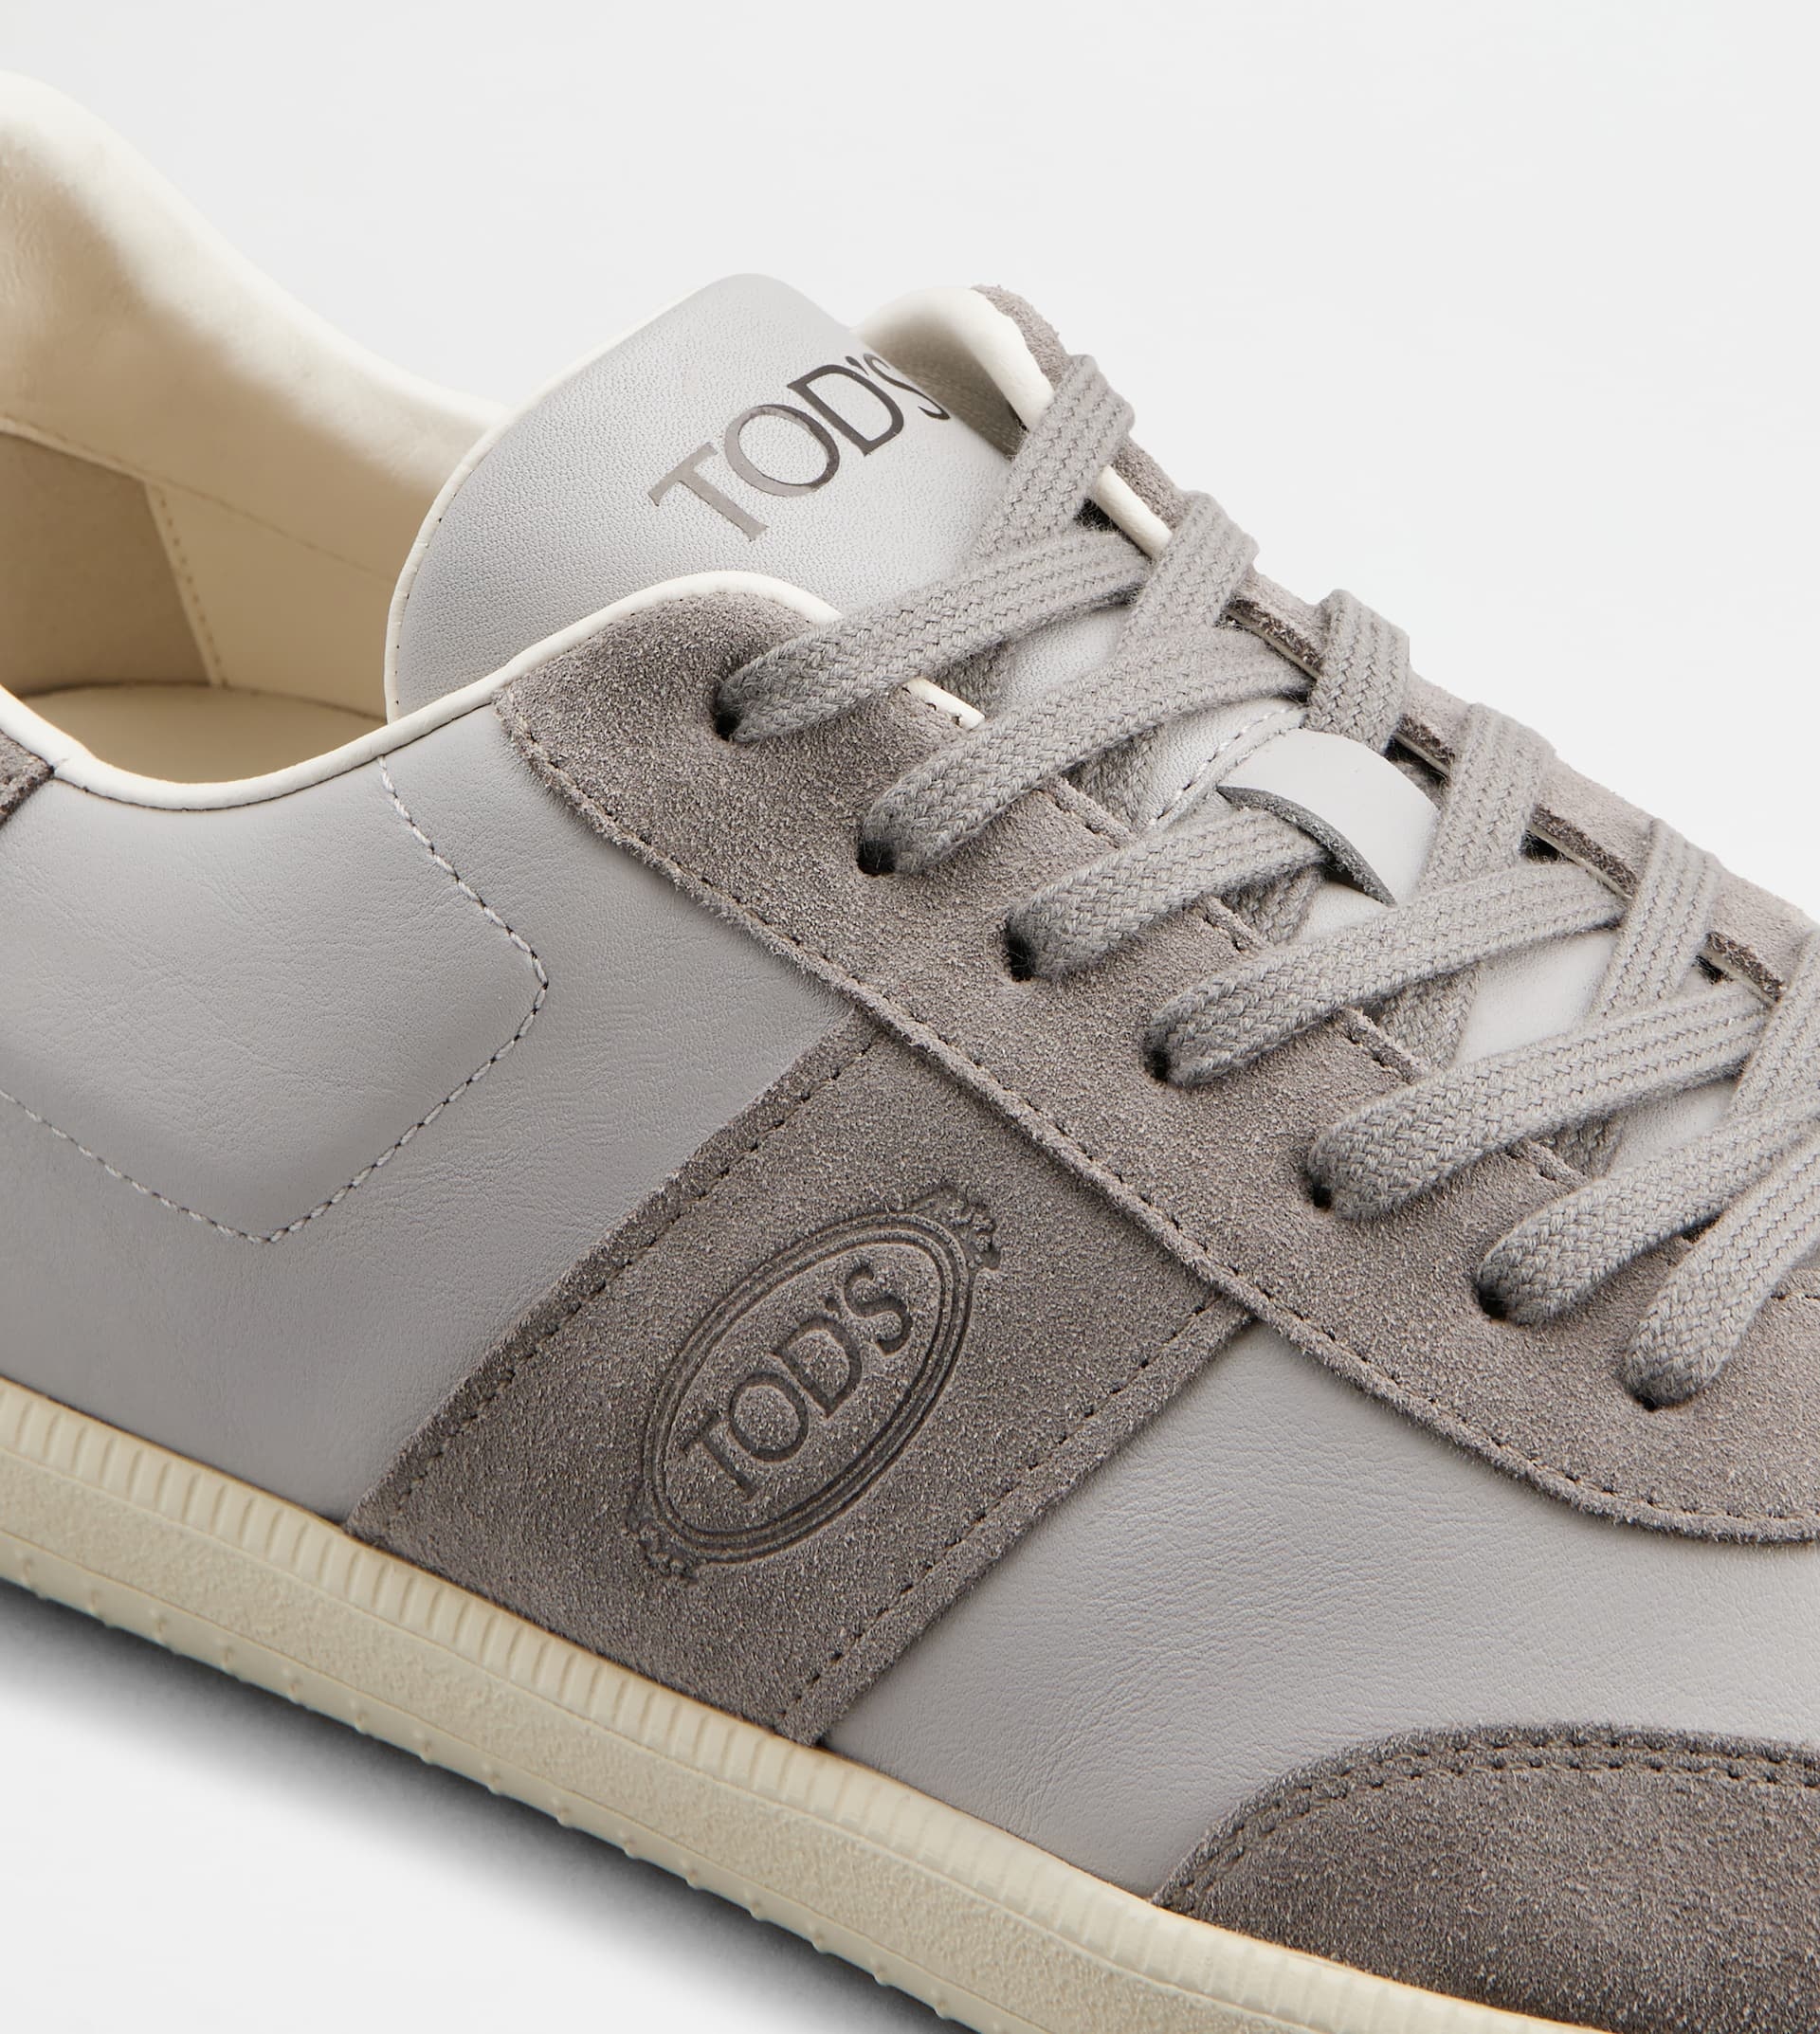 TOD'S TABS SNEAKERS IN SMOOTH LEATHER AND SUEDE - GREY - 5